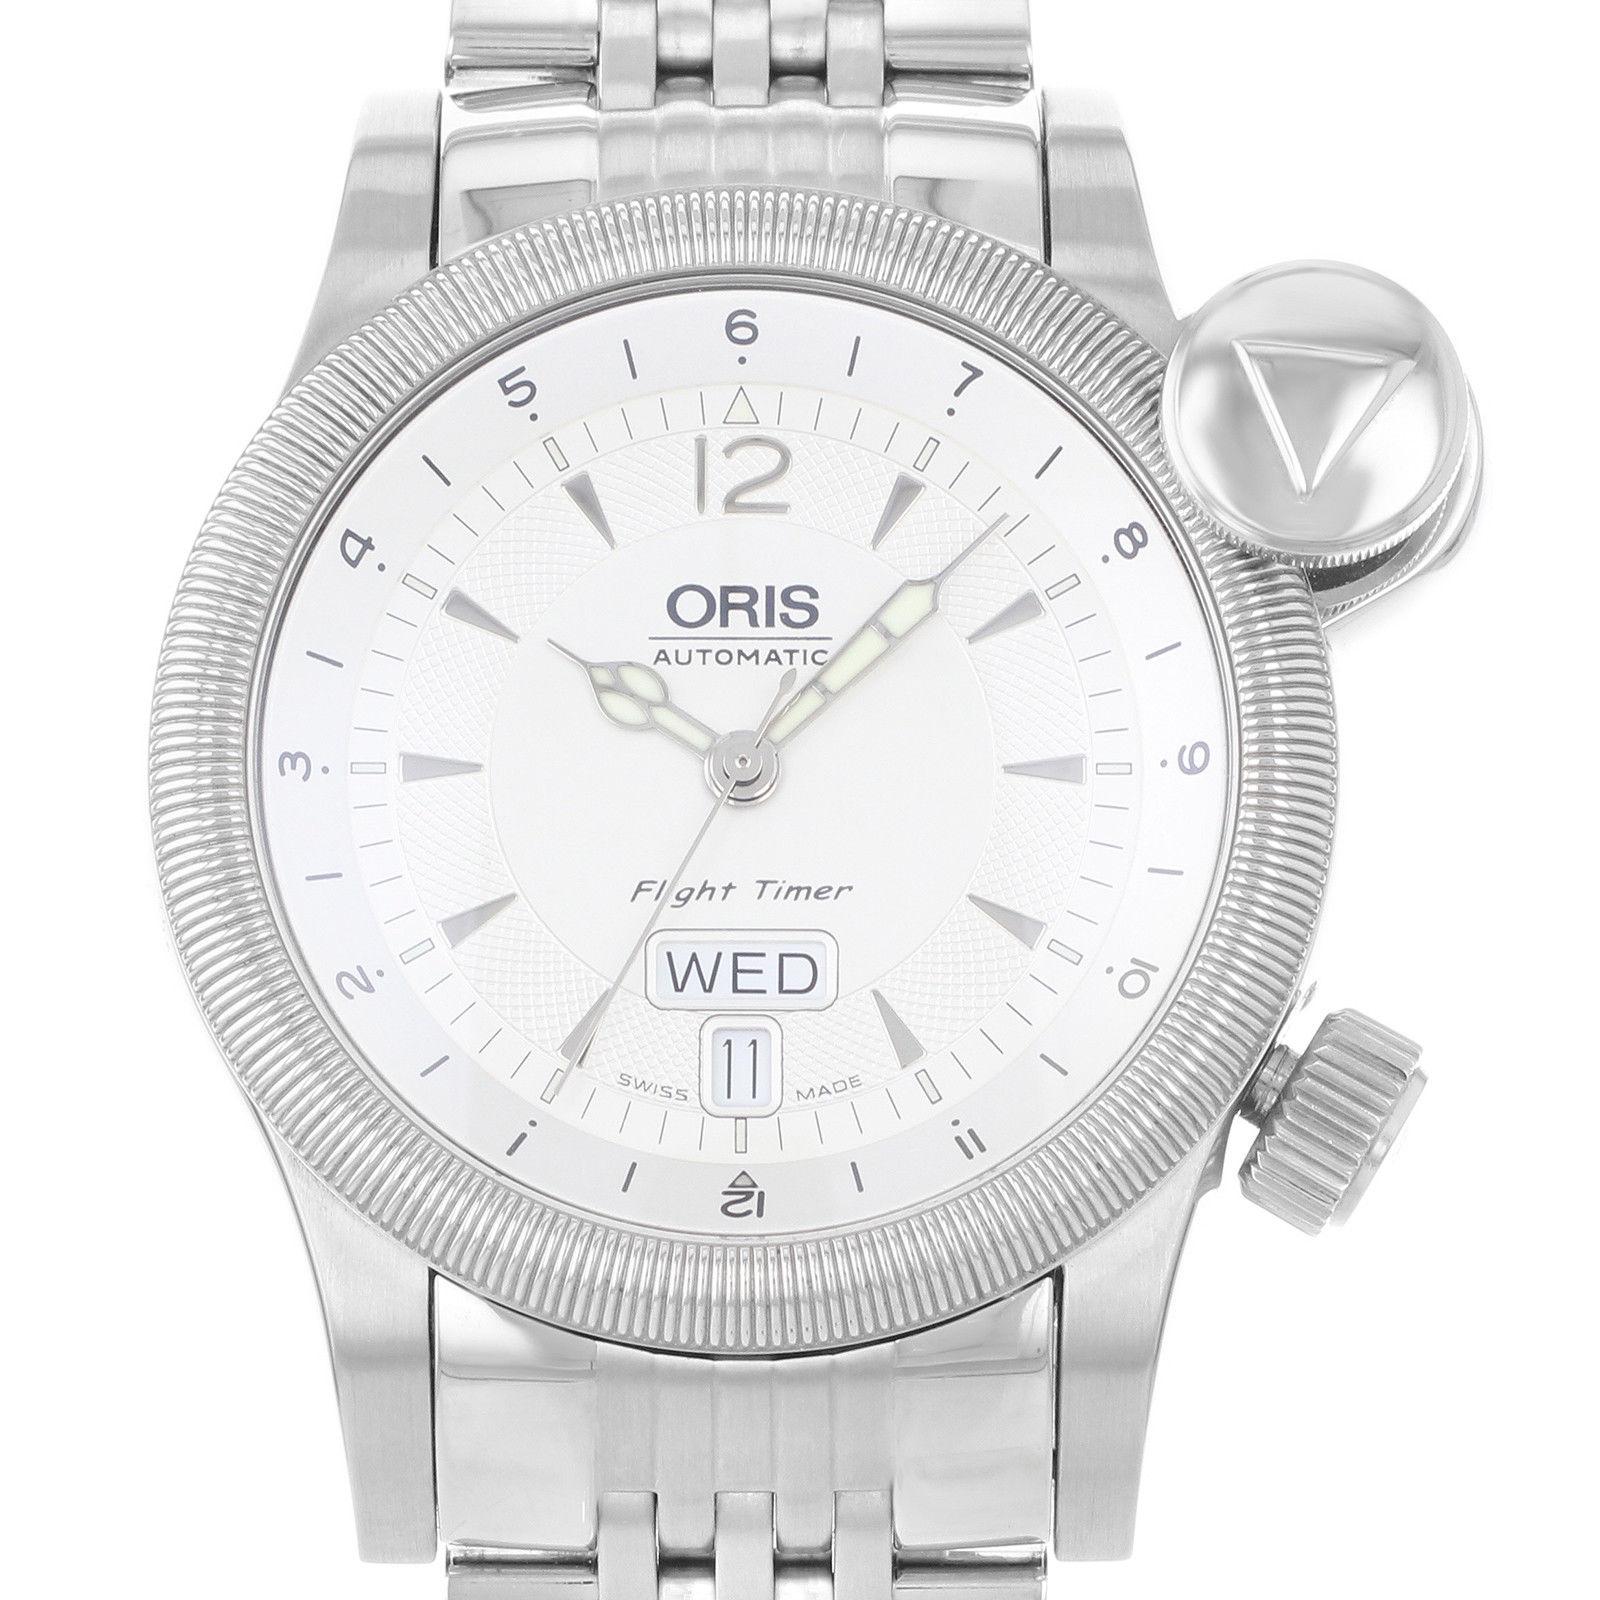 (17451)
This display model Oris Flight Timer 635 7568 40 61 MB is a beautiful men's timepiece that is powered by an automatic movement which is cased in a stainless steel case. It has a round shape face, day & date dial and has hand sticks style